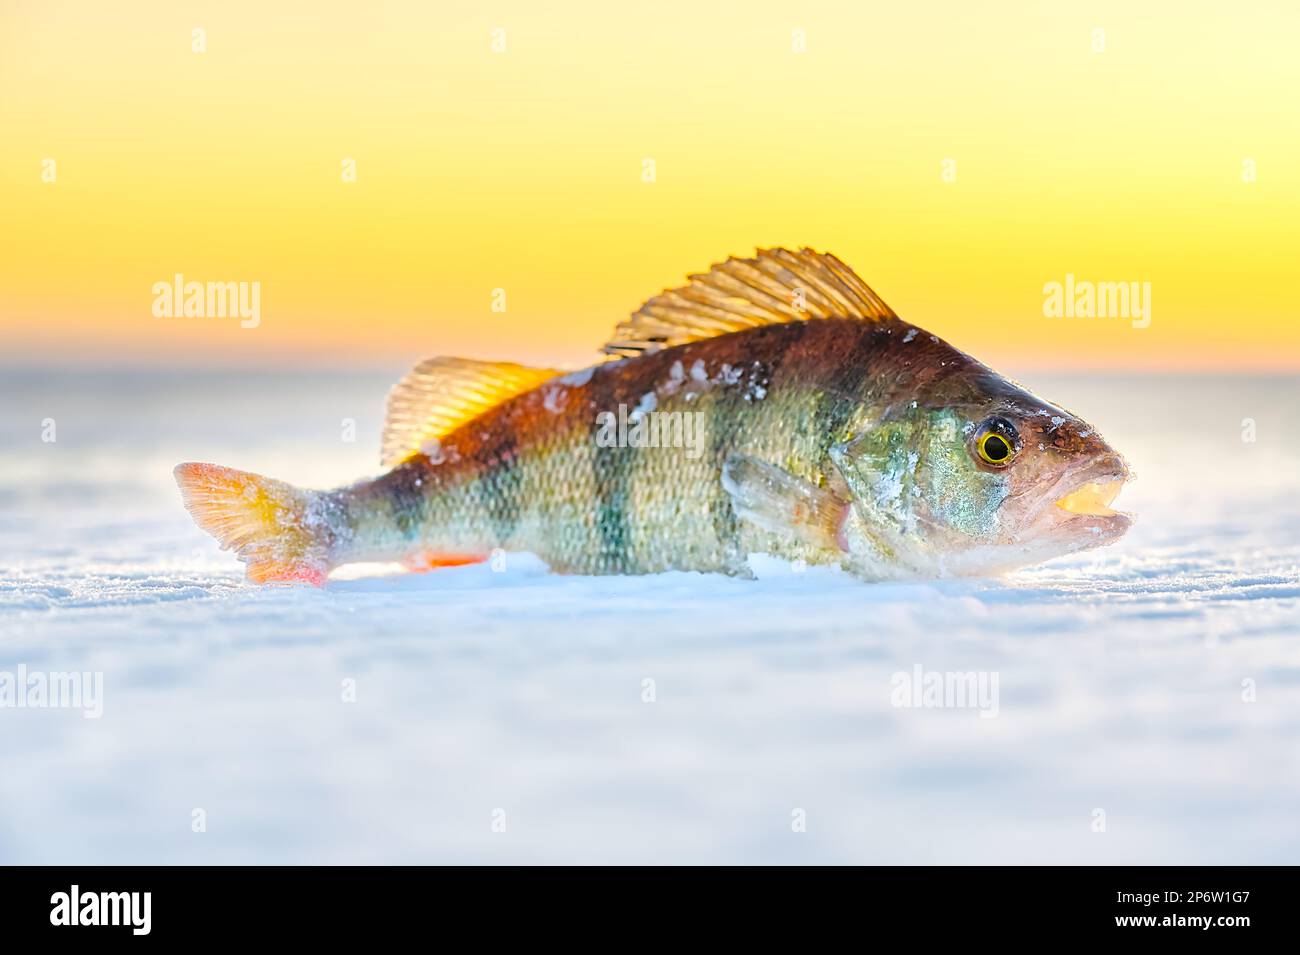 Ice fishing perch on the snow. winter fishing, perch fish on the